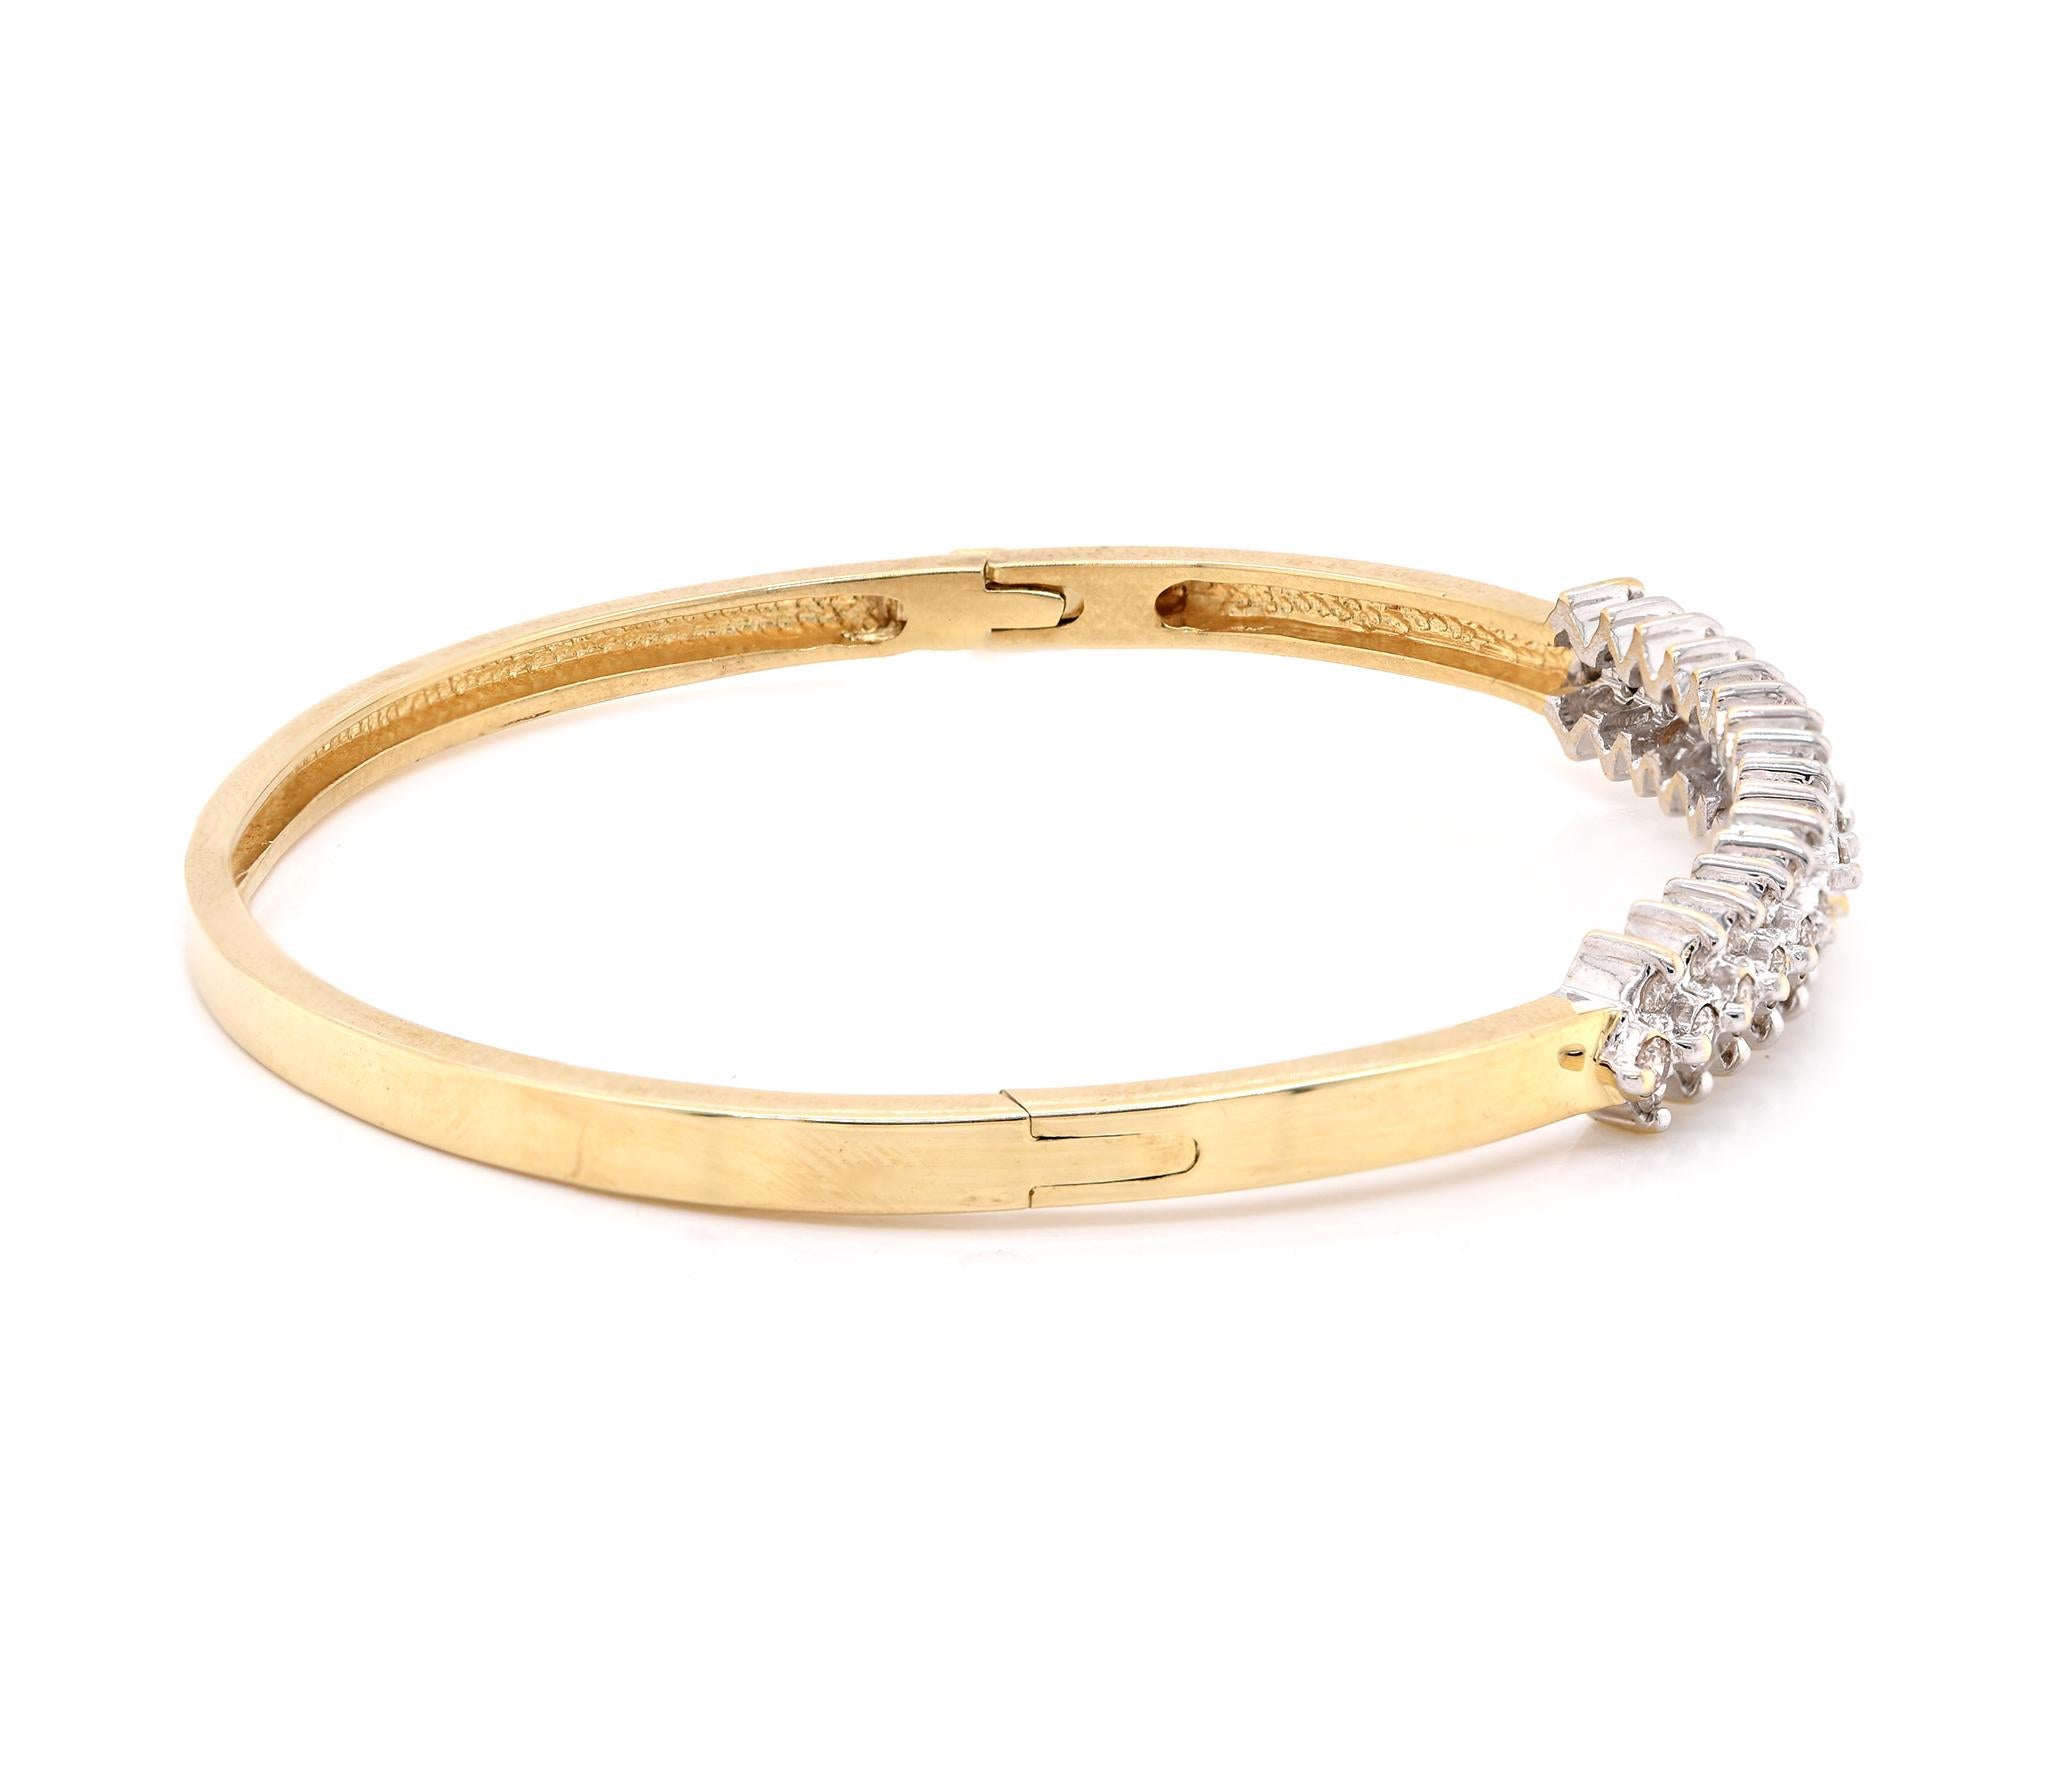 Designer: custom designed 
Material: 14k yellow gold
Diamonds: 49 round cut = .83cttw
Color: H
Clarity: SI2
Dimensions: bracelet will fit a 7-inch wrist 
Weight: 13.43 grams	